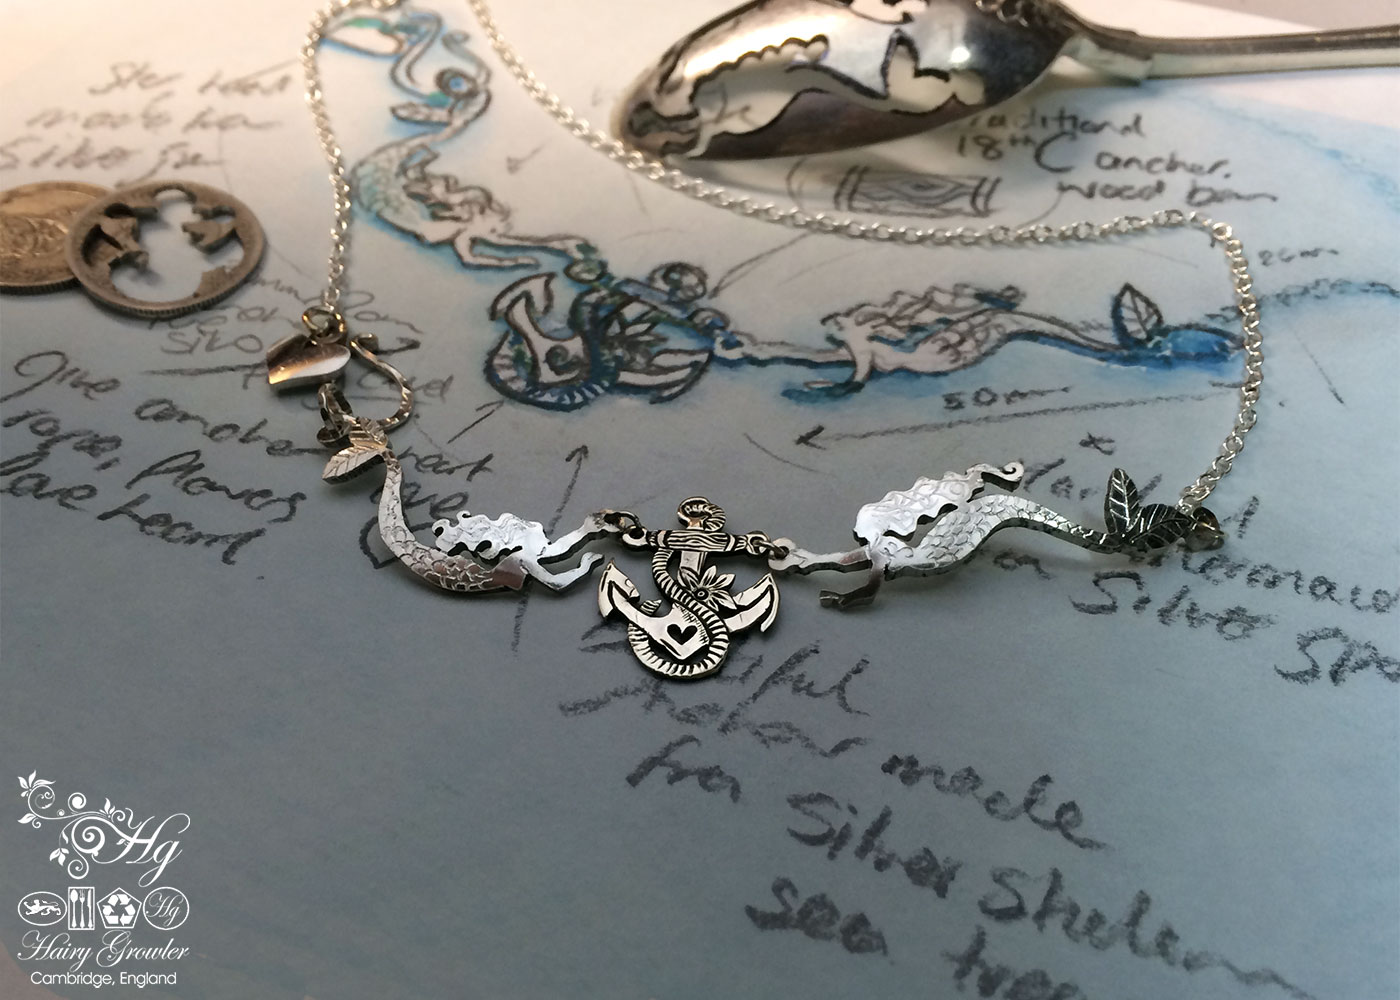 Handmade and upcycled silver coin mermaid necklace made in landlocked Cambridge, UK